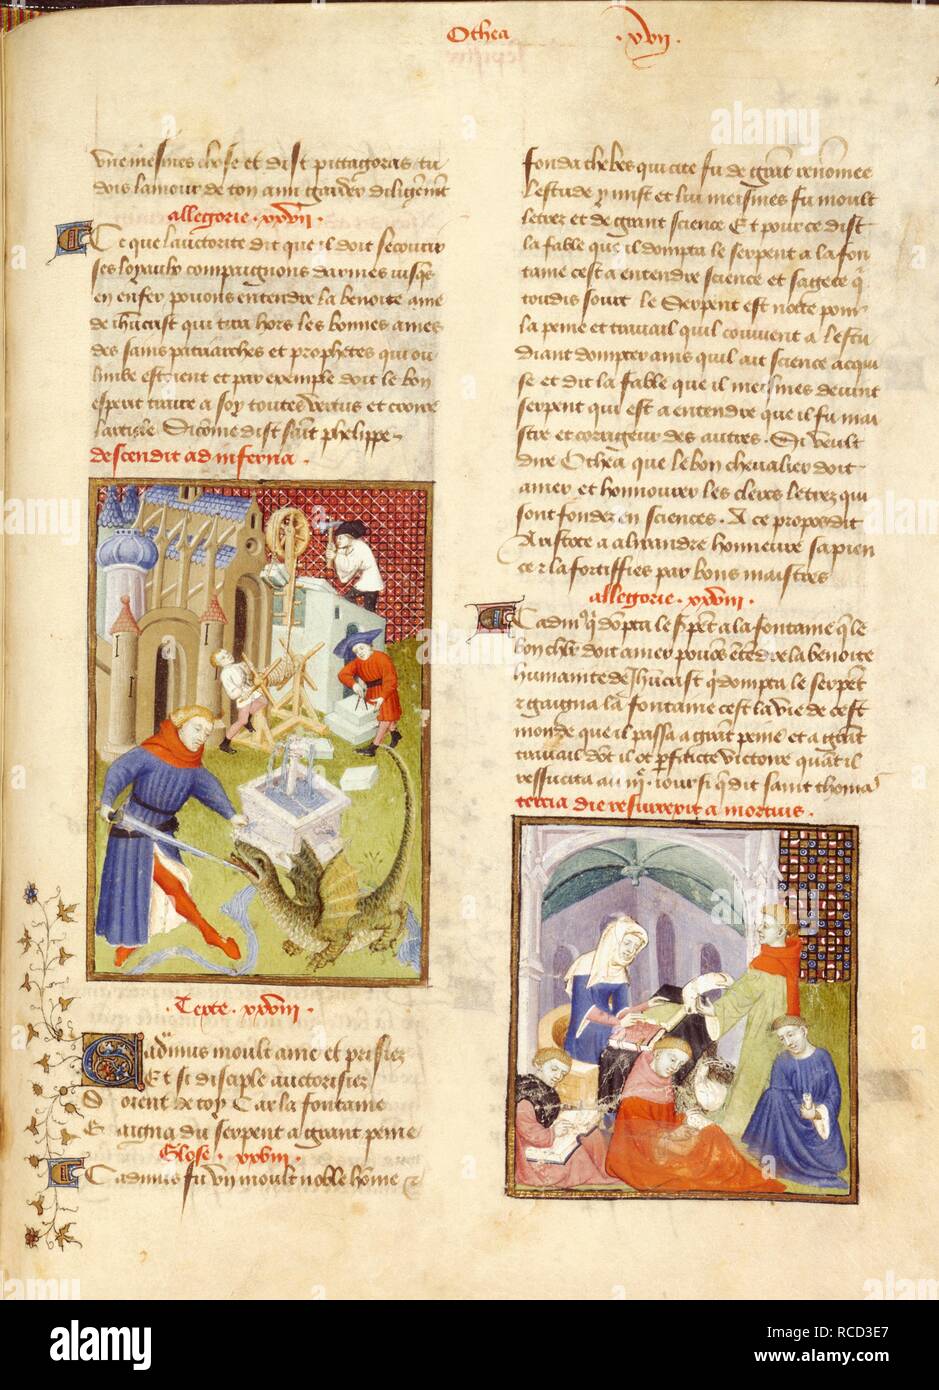 Cadmus kills the dragon. Collected Works of Christine de Pisan. France (Paris); 1410-1411. (Whole folio) The building of Thebes; in the foreground, Cadmus kills the dragon at the Spring of Ares. From L'EpÃ®tre d'OthÃ©a.  Image taken from Collected Works of Christine de Pisan.  Originally published/produced in France (Paris); 1410-1411. . Source: Harley 4431, f.109. Language: French. Author: Pisan, Christine de. Master of the CitÃ© des Dames. Stock Photo